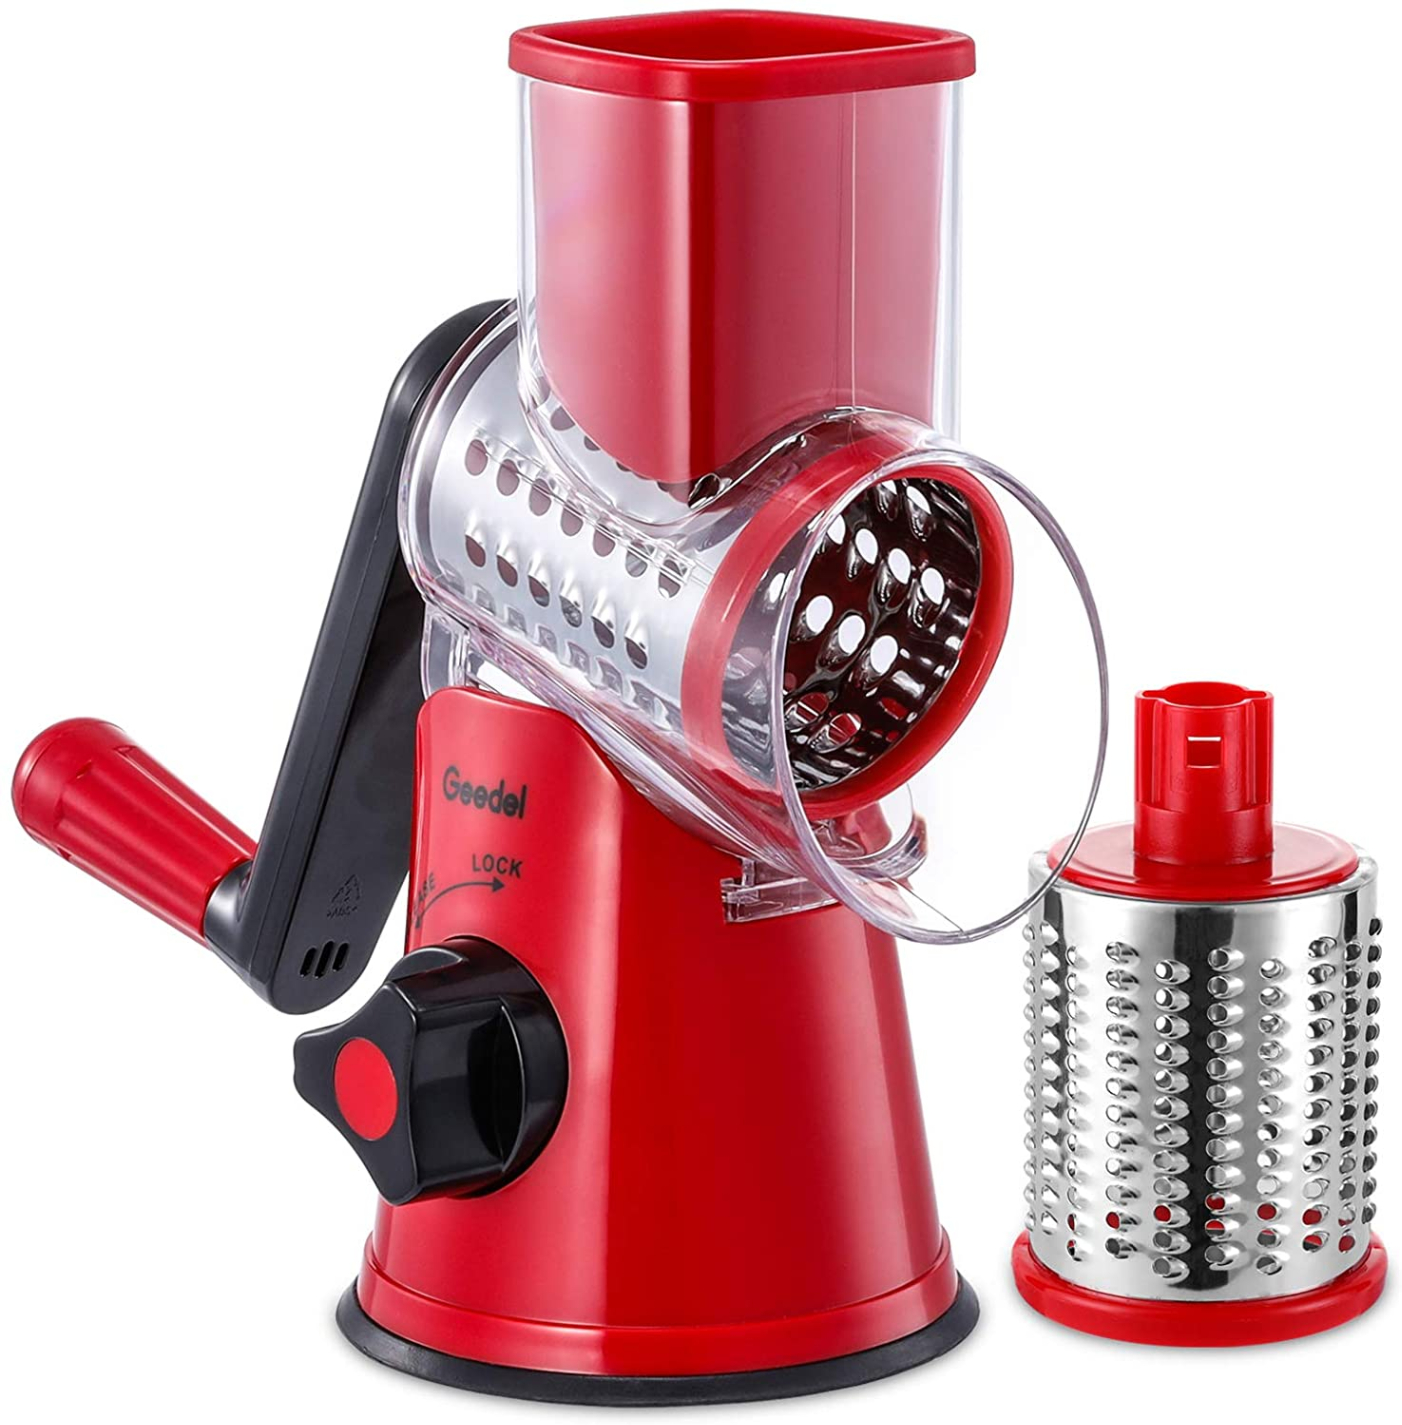 LAGPOUSI Rotary Cheese Grater, Kitchen Mandoline Grater with 2 Drum Blades, Easy to Clean Rotary Grater Cheese Shredder for Fruit, Vegetables, Nuts 